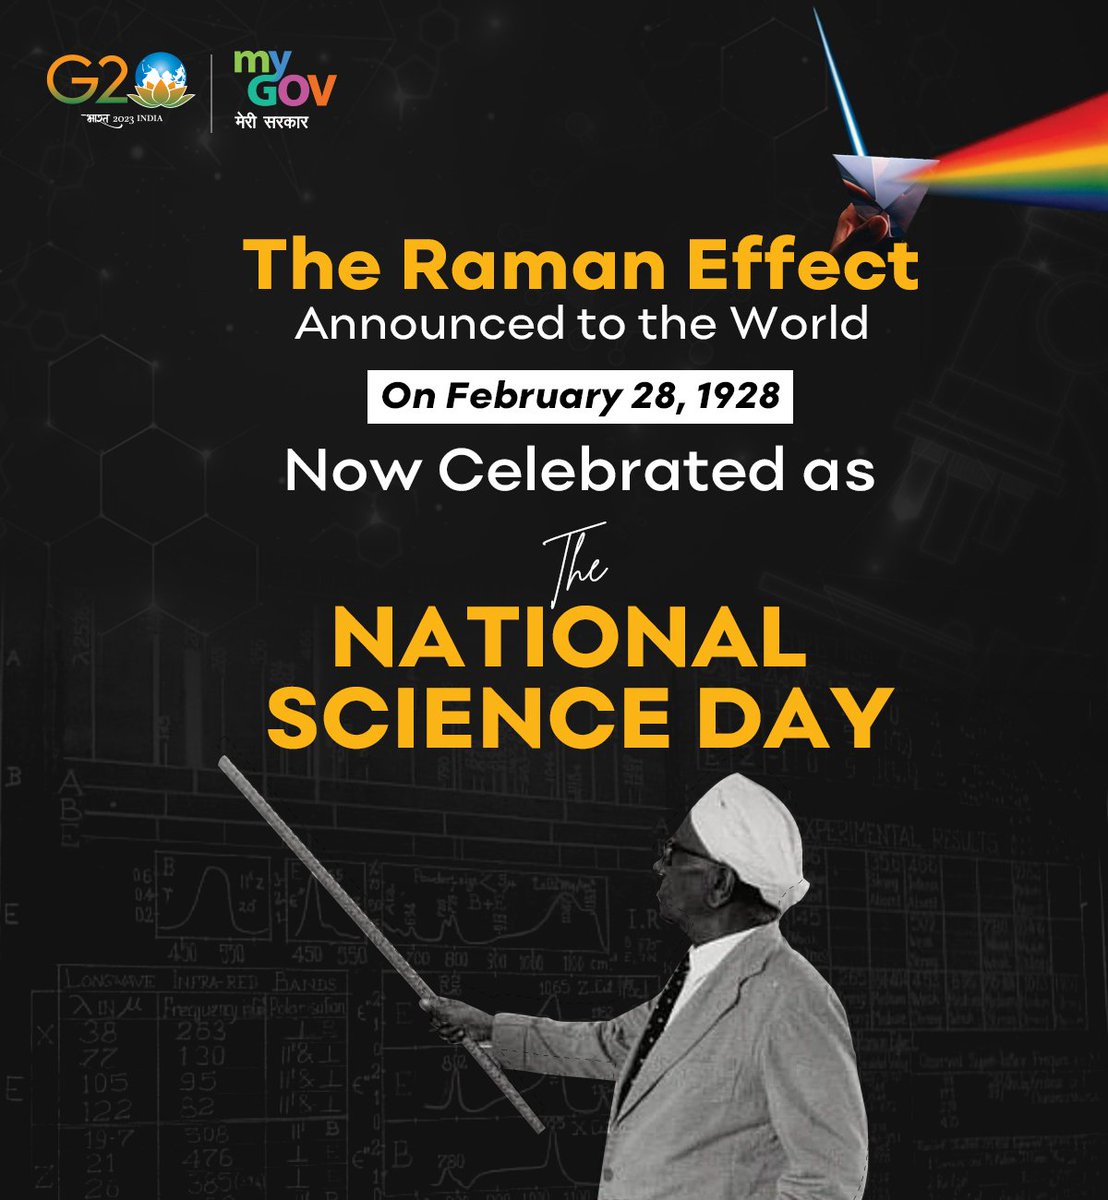 National Science Day is celebrated to mark the discovery of #RamanEffect  by the Nobel Prize-winning Physicist, #BharatRatna Dr. CV Raman on this day. His life & work will always serve as an inspiration for our scientific community.

#NationalScienceDay2023 #ScienceDay #India